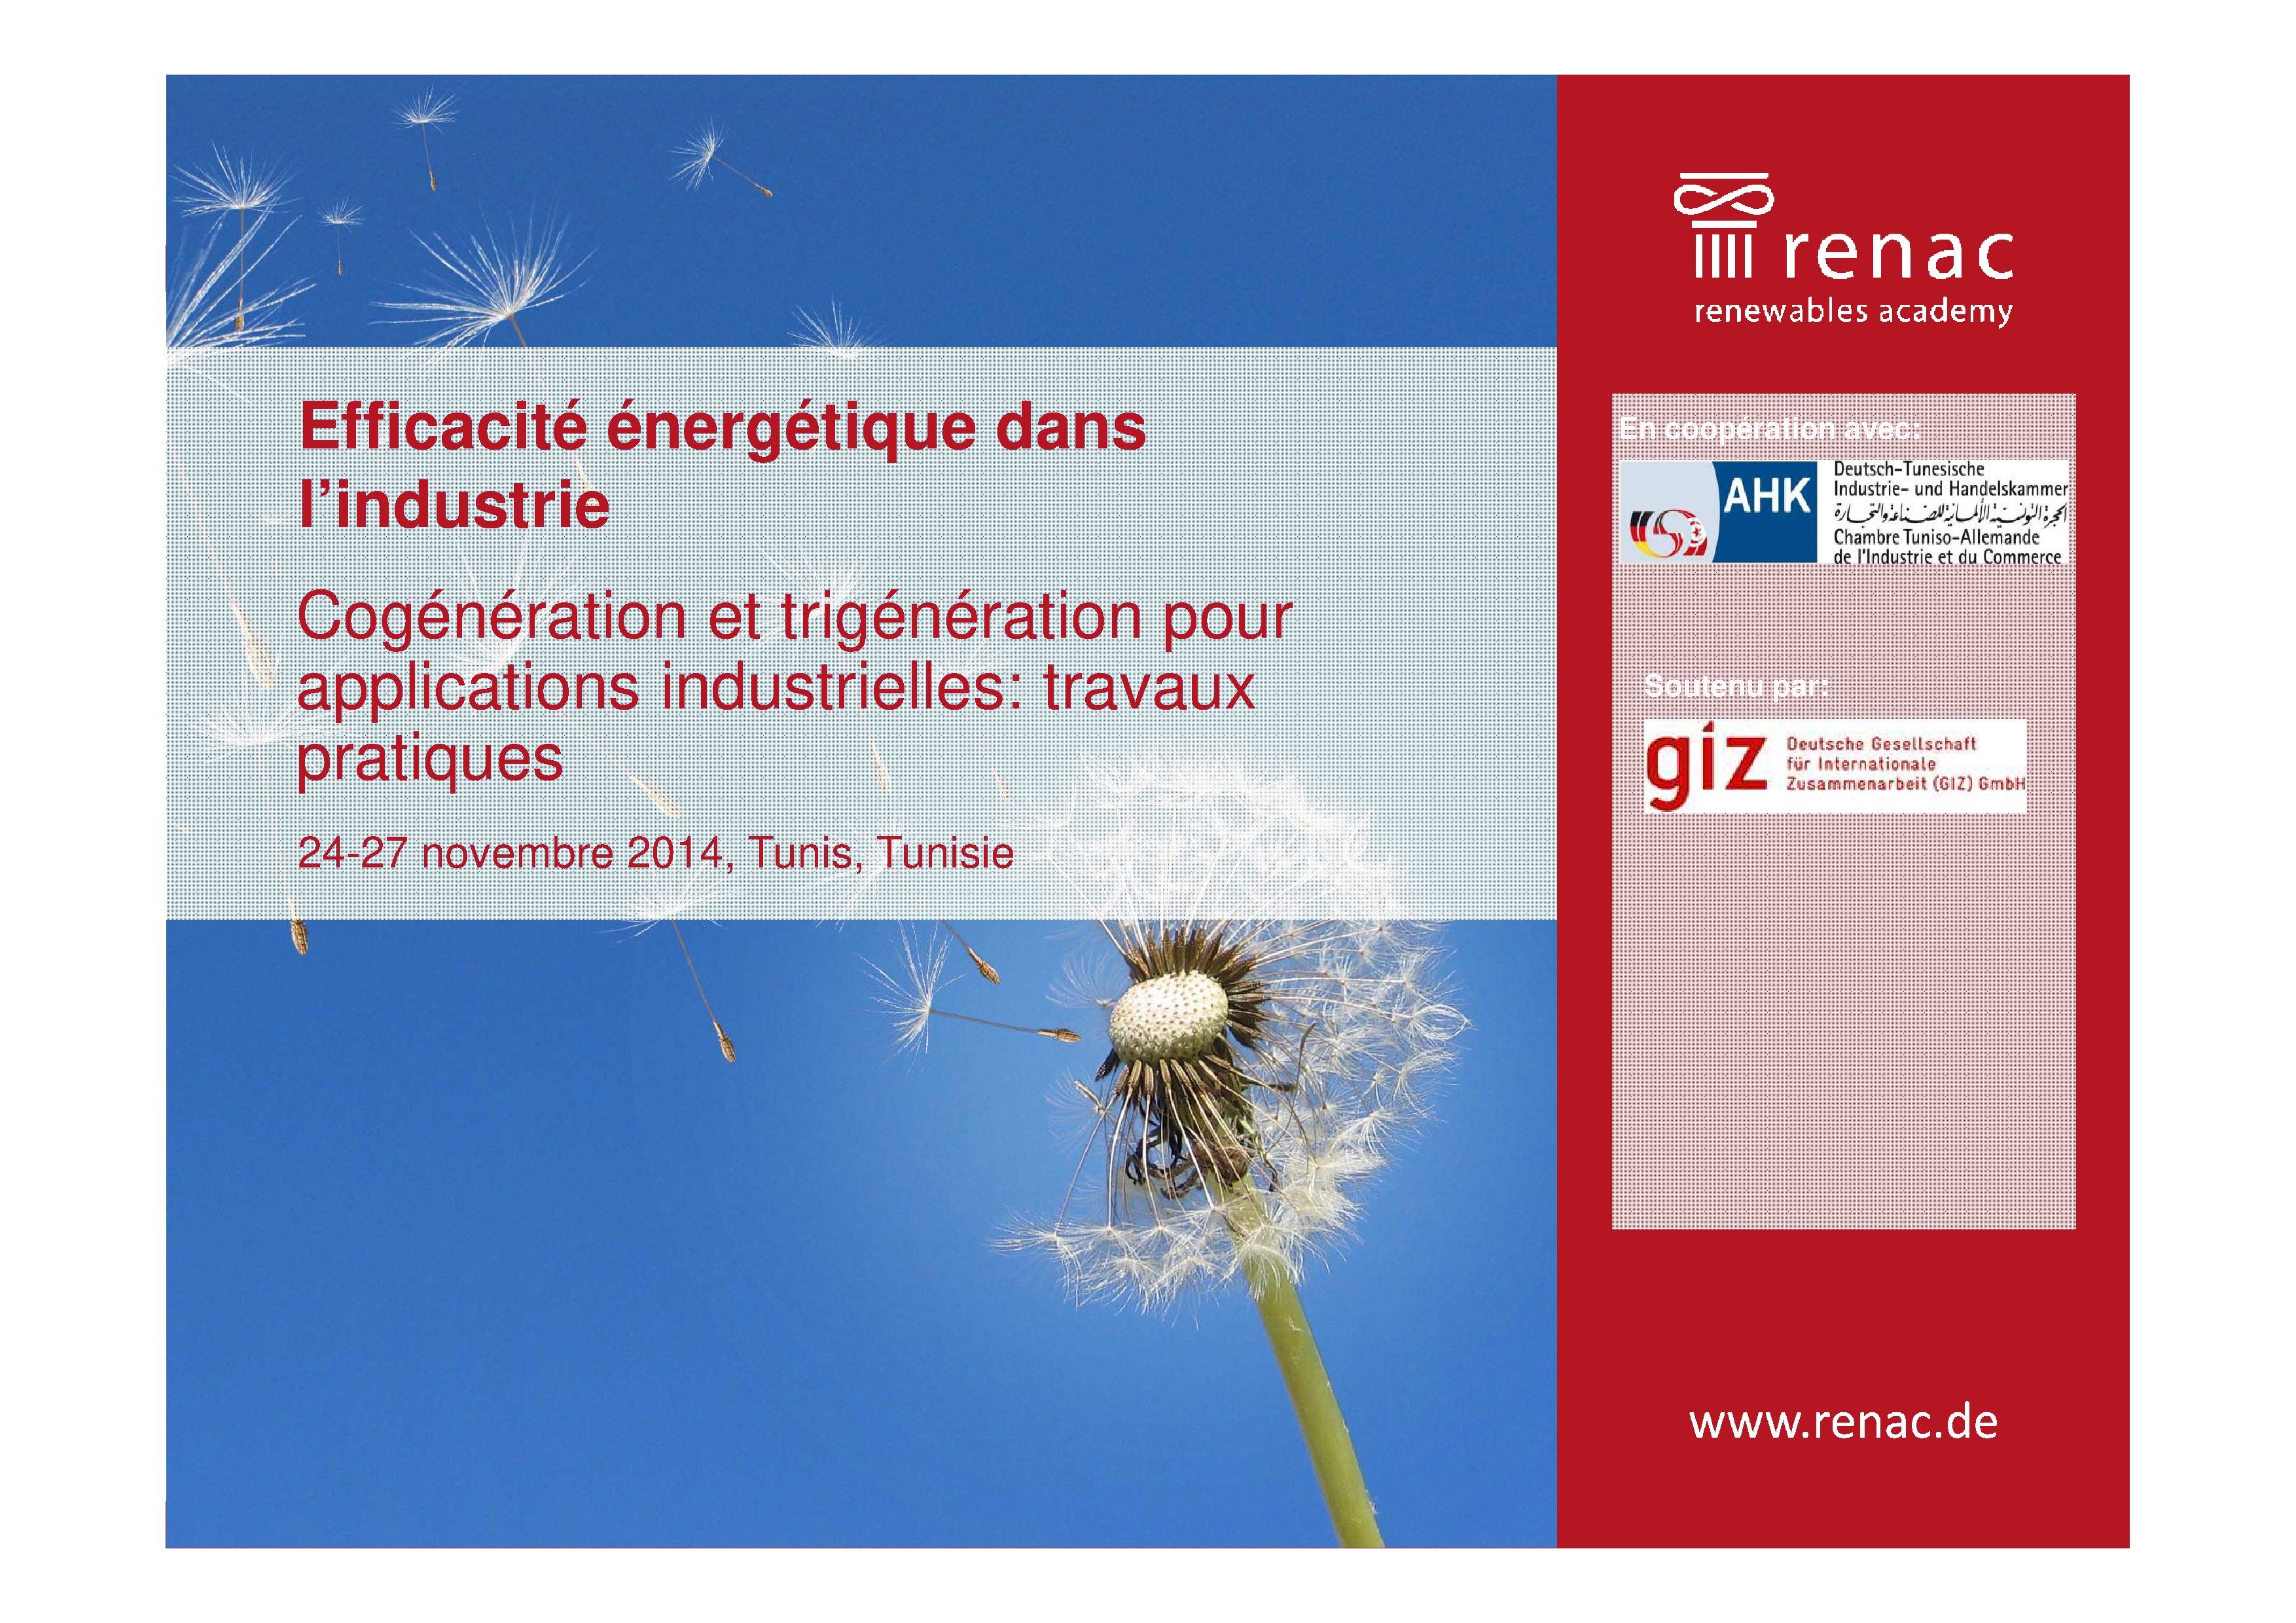 (11) Cogeneration and trigeneration for industrial applications: financing